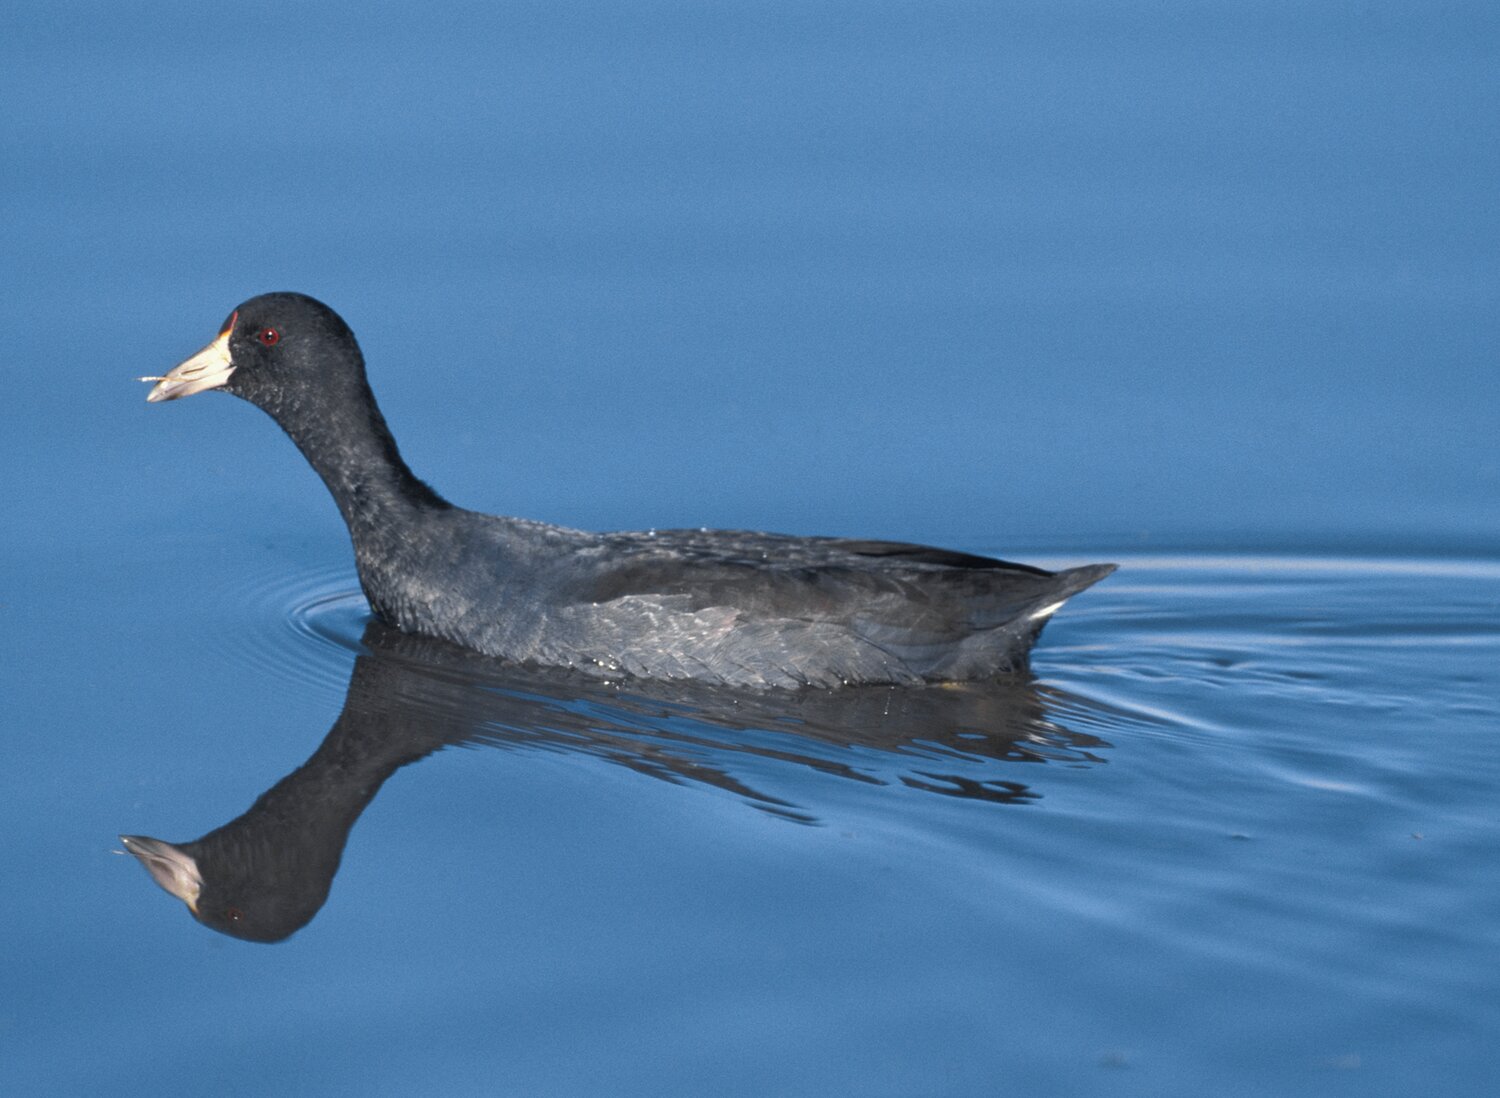 The American Coot


Contributed Photo